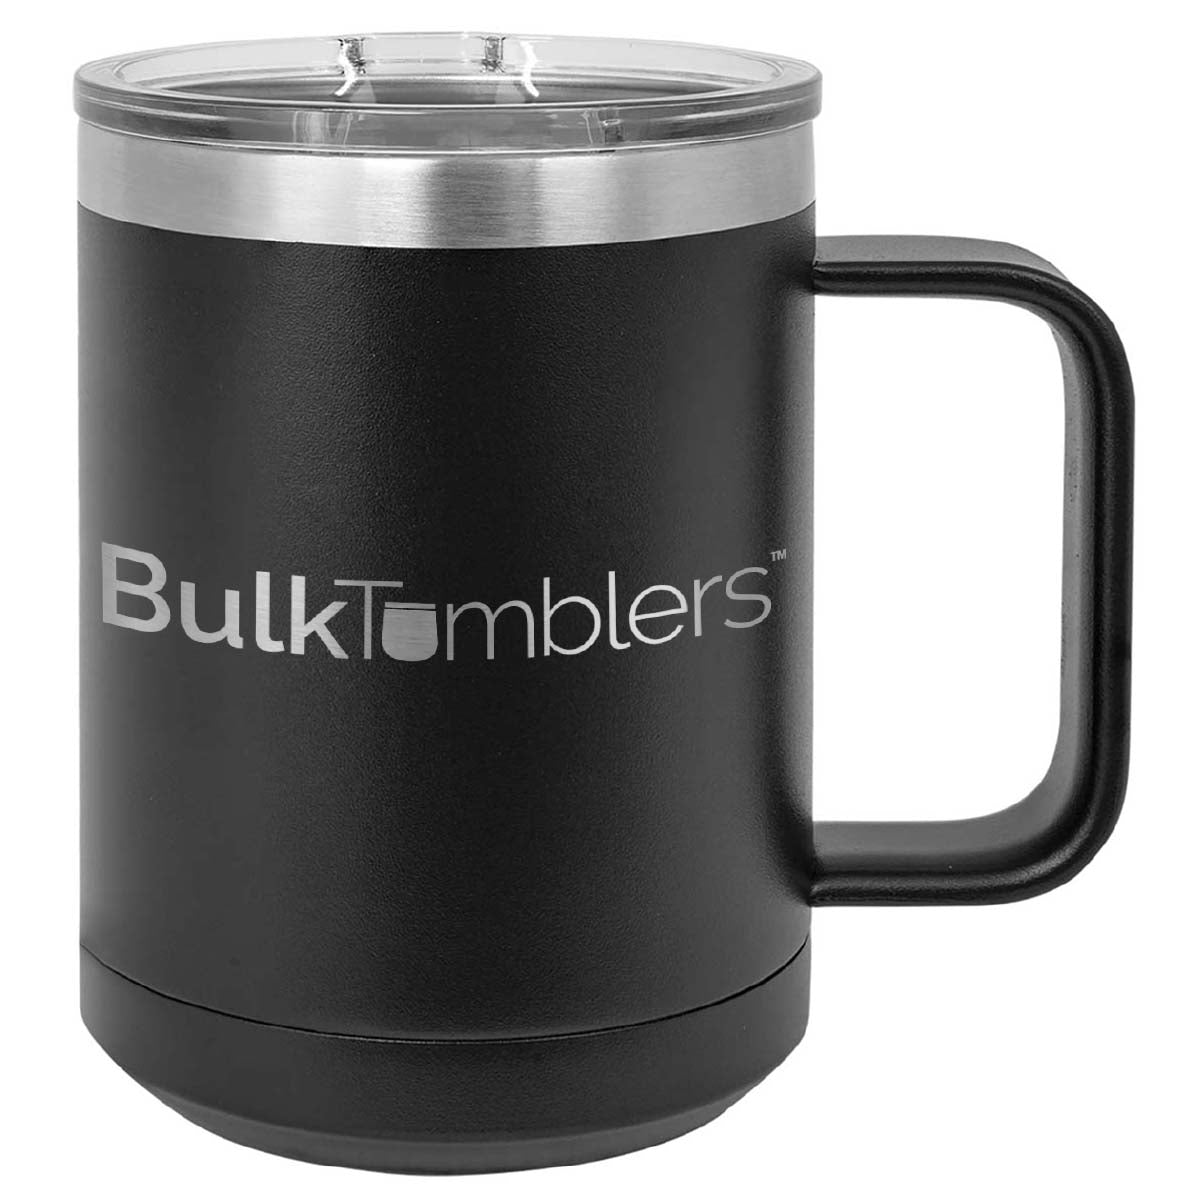 15 Oz Stainless Steel Insulated Coffee Mug Personalized Laser Engraved Bulk Tumblers 8217